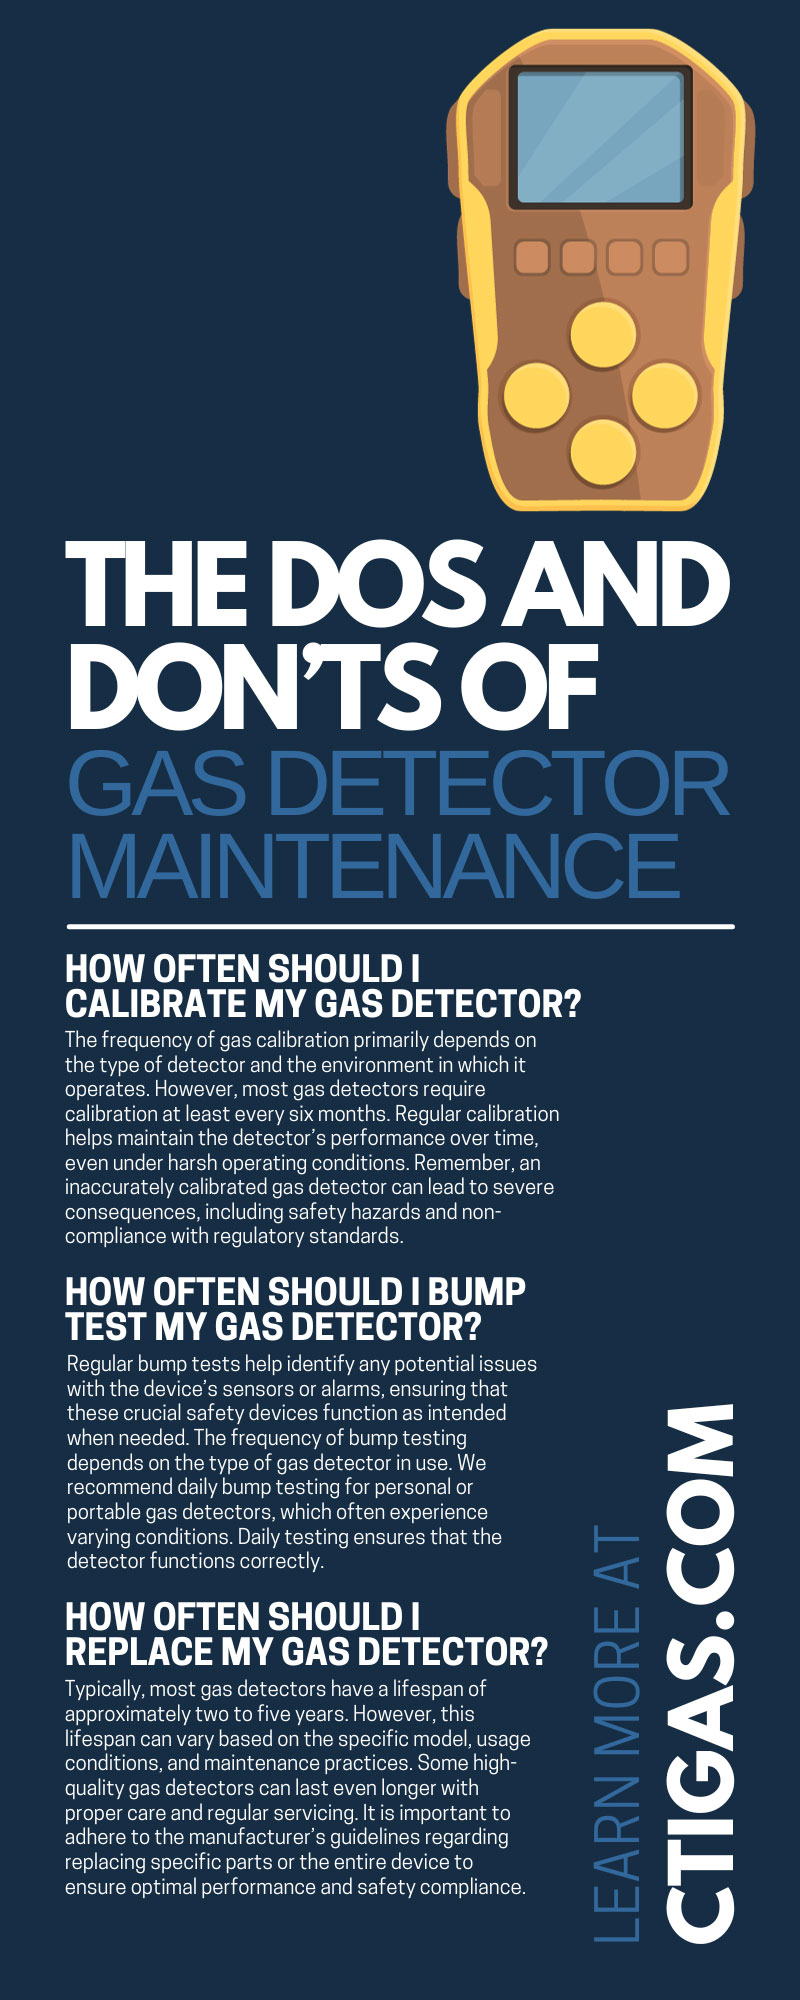 The Dos and Don’ts of Gas Detector Maintenance